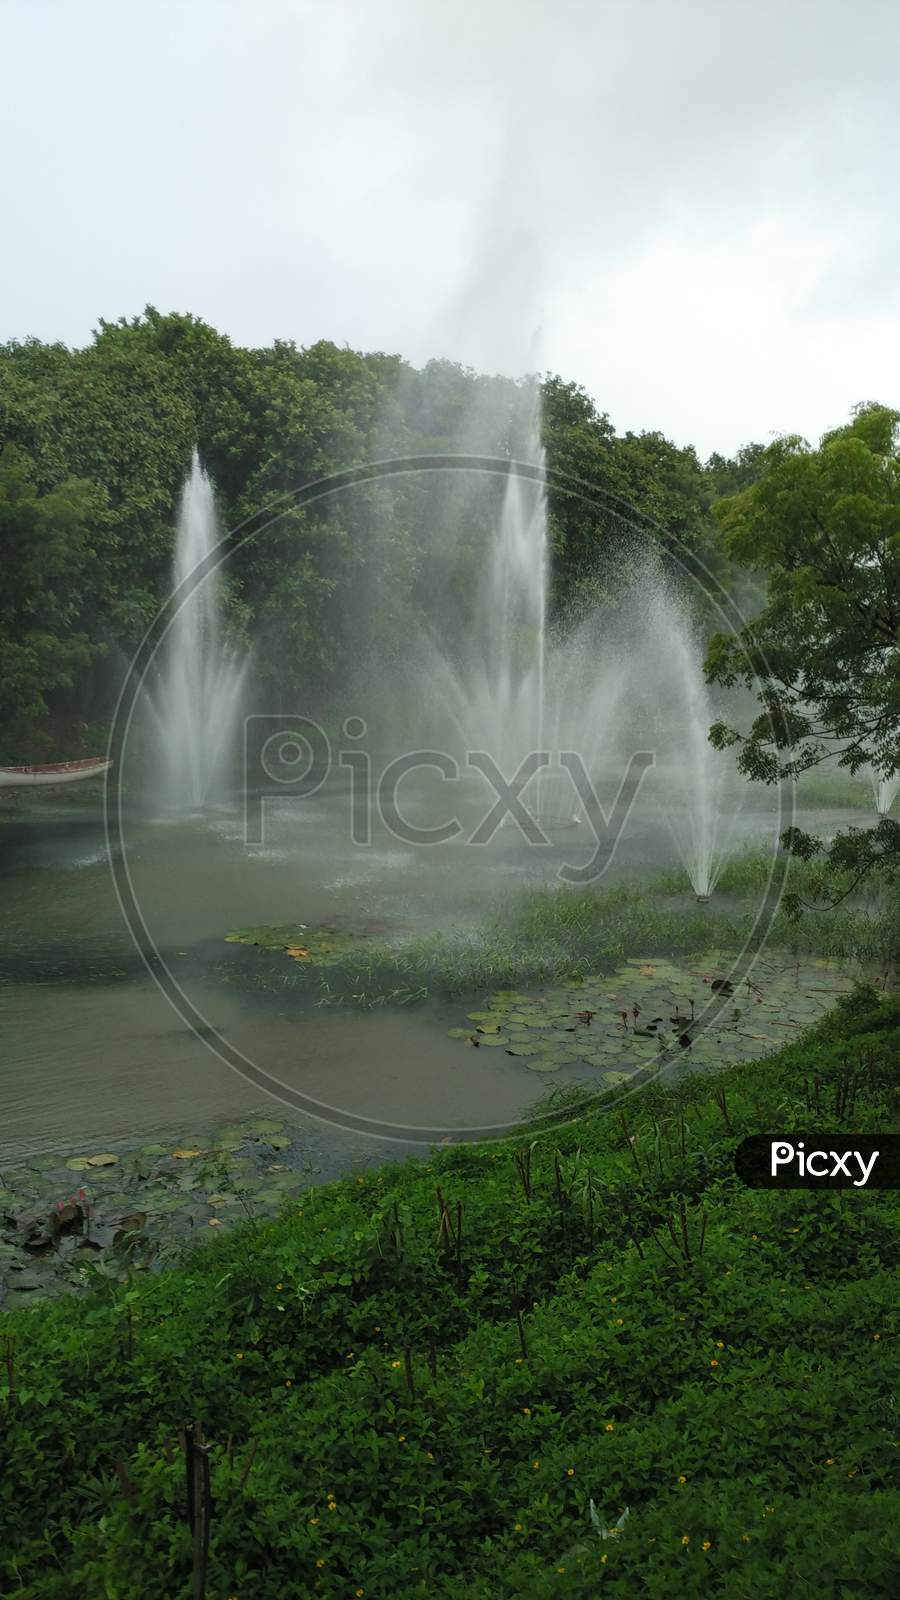 The Fountain In The Park. Best Nature With Fountain.